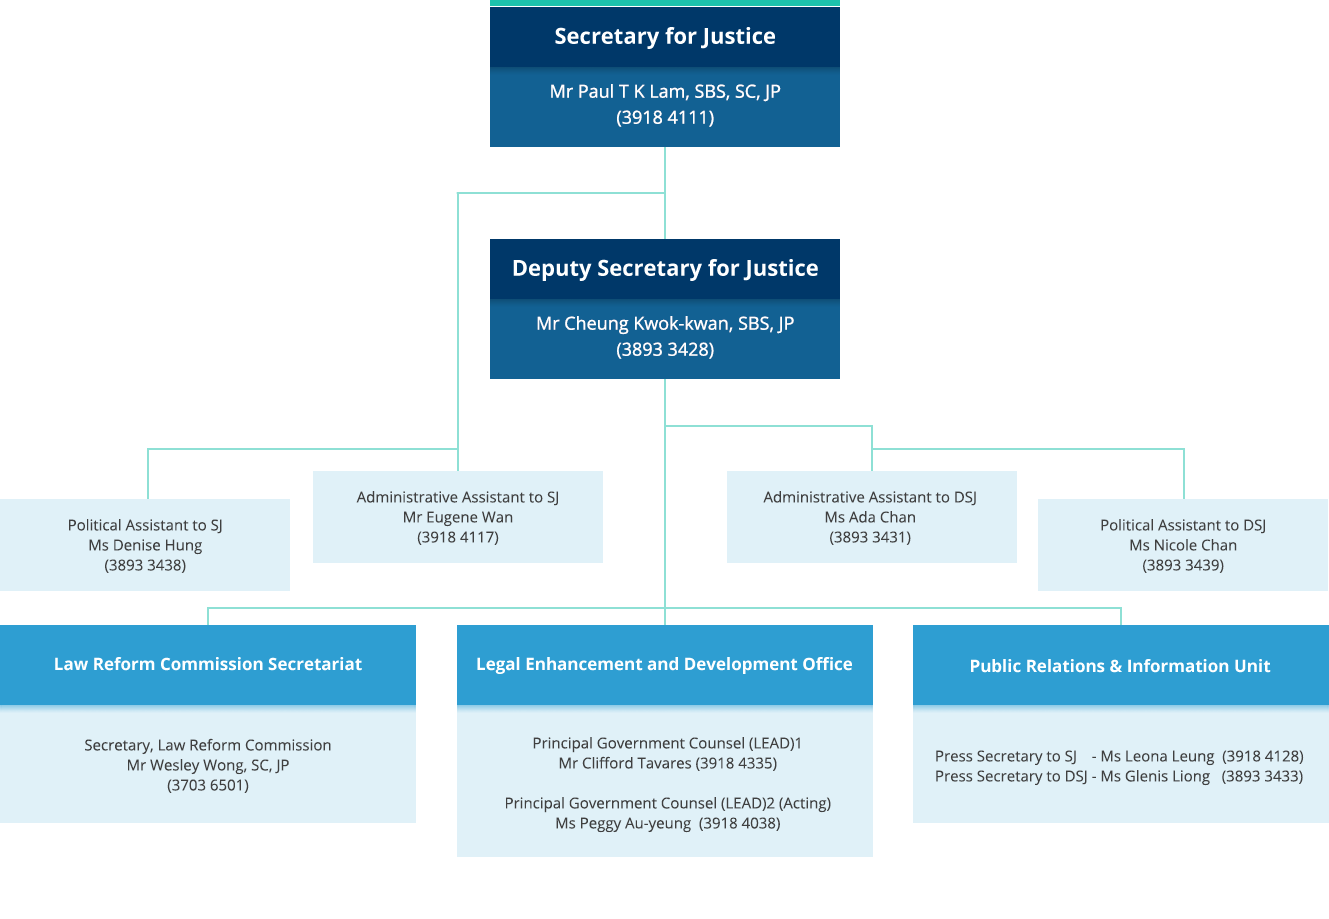 Organisation chart of the Secretary for Justice's Office. Secretary for Justice, Mr Paul T K Lam, SBS, SC, JP (3918 4111). Deputy Secretary for Justice, Mr Cheung Kwok-kwan, SBS, JP (3893 3428). Administrative Assistant to SJ, Ms Chelsea Wong (3918 4117). Political Assistant to SJ, Ms Denise Hung (3893 3438). Administrative Assistant to DSJ, Ms Ada Chan (3893 3431). Political Assistant to DSJ, Ms Nicole Chan (3893 3439).Law Reform Commission Secretariat, Secretary, Law Reform Commission, Mr Wesley Wong, SC, JP (3703 6501). Legal Enhancement and Development Office. Principal Government Counsel (LEAD)1, Mr Clifford Tavares (3918 4335). Principal Government Counsel (LEAD)2 (Acting), Ms Peggy Au-yeung  (3918 4038). Public Relations & Information Unit. Press Secretary to SJ, Ms Daisy Kwok (3918 4128). Press Secretary to DSJ, Ms Glenis Liong (3893 3433). SJO's Coordination office